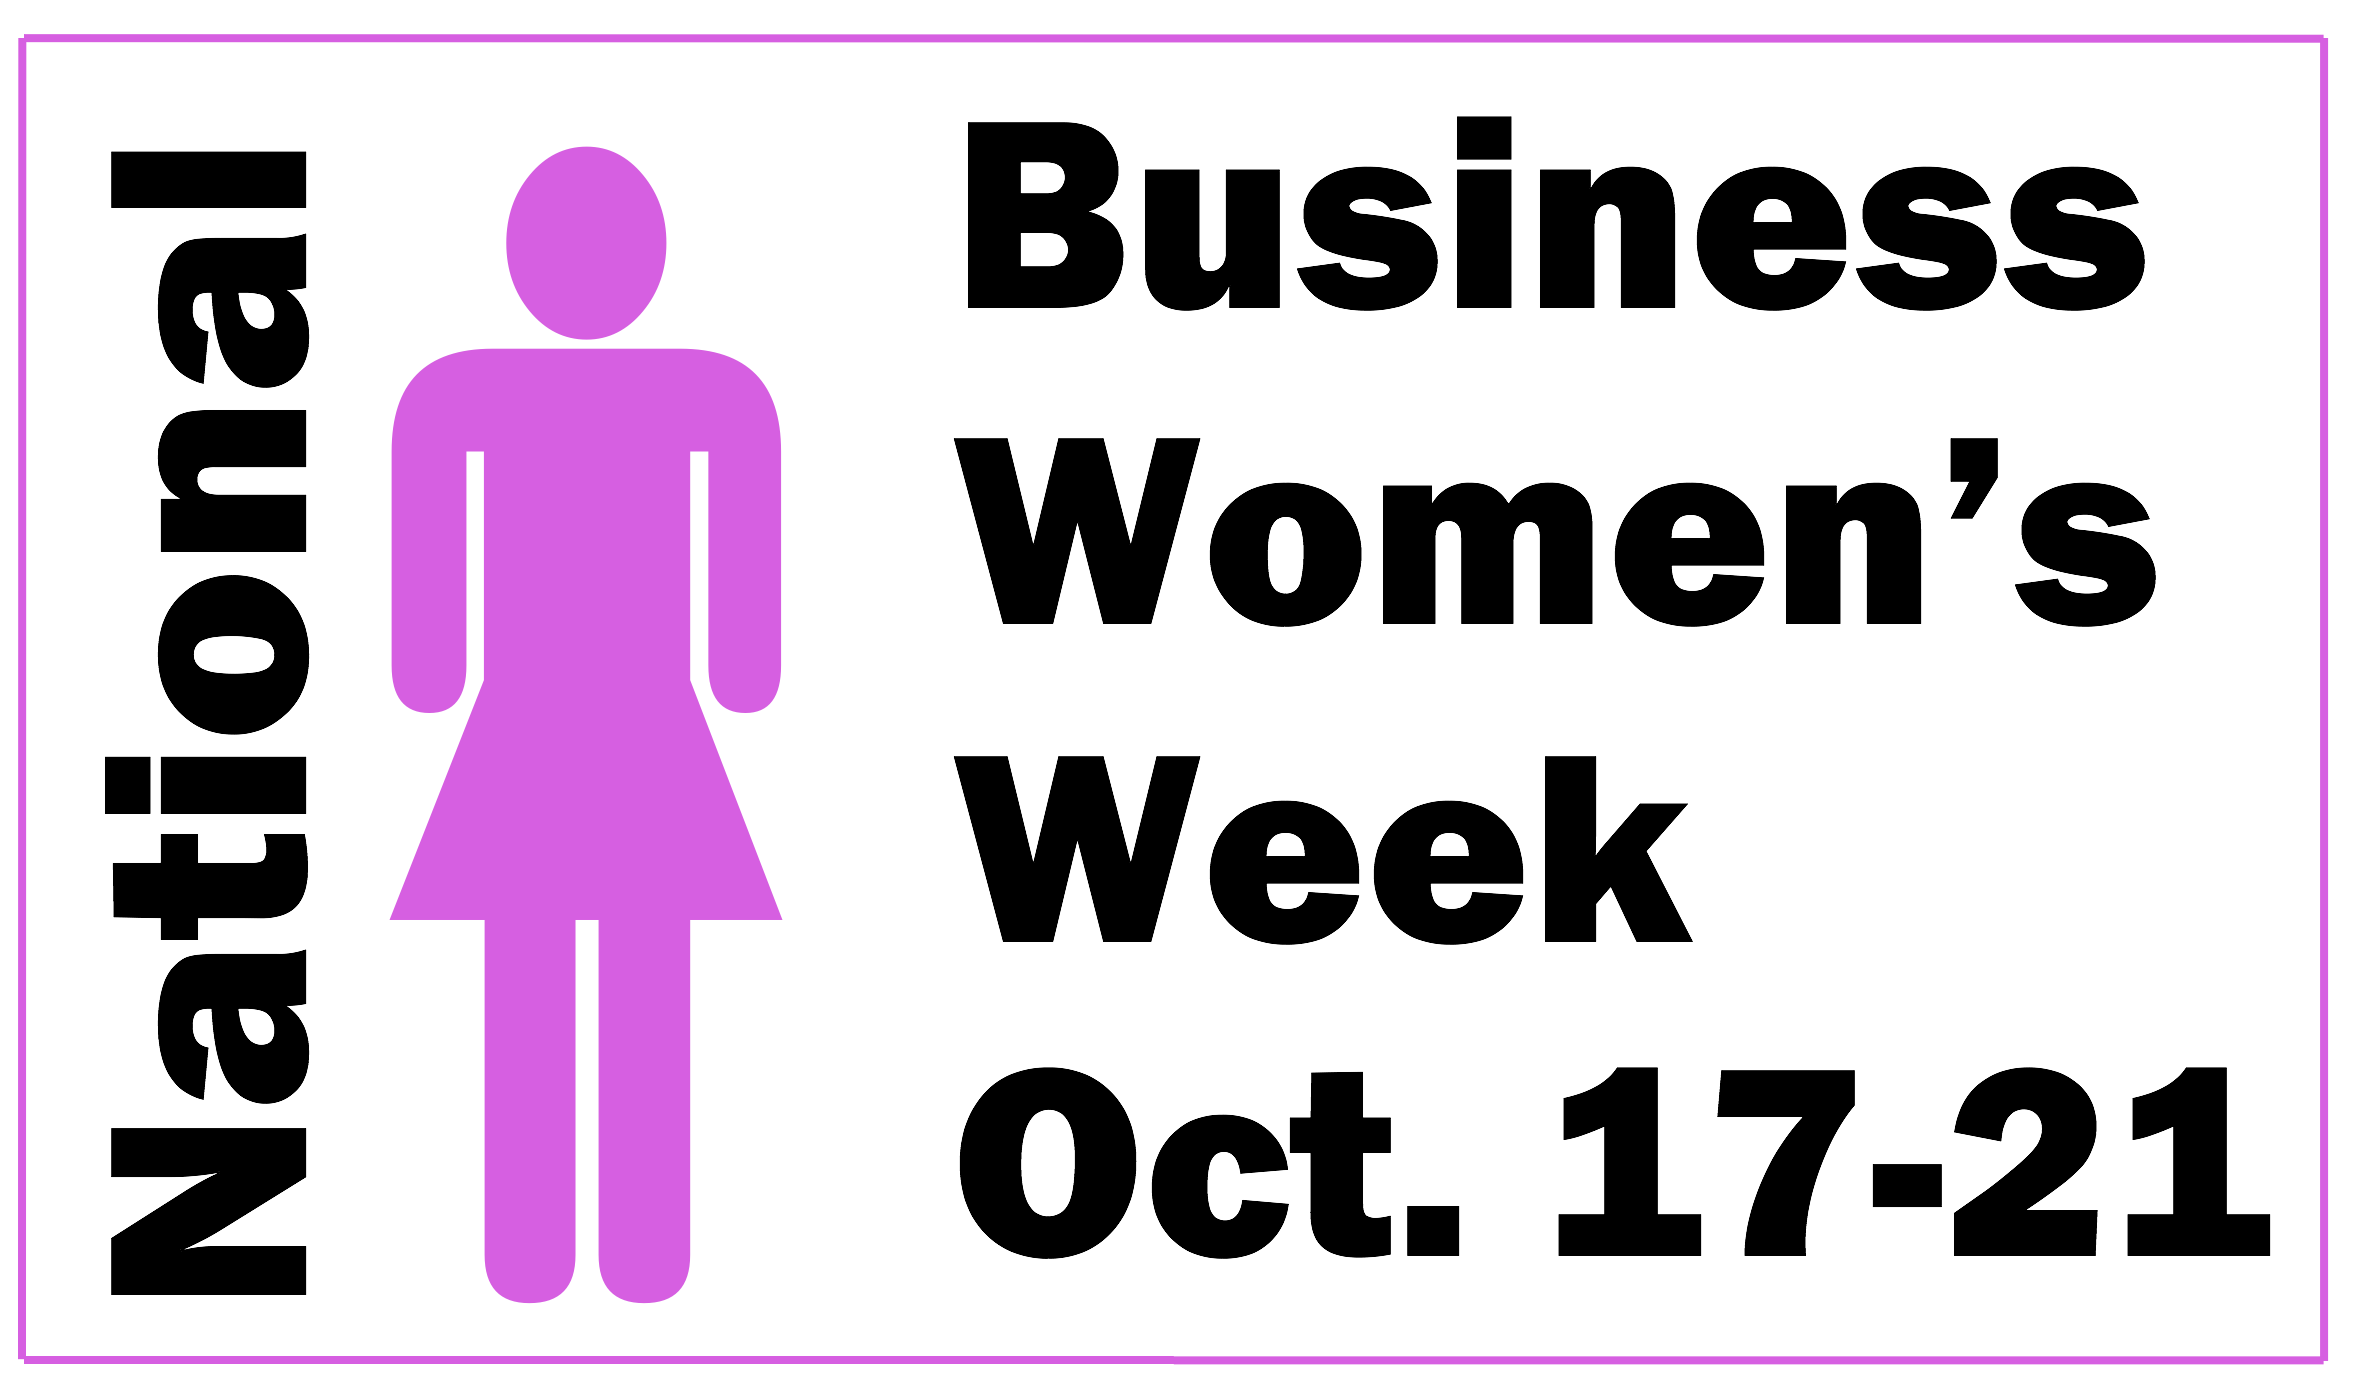 National Business Women's Week wording with a pink "bathroom" outline symbol